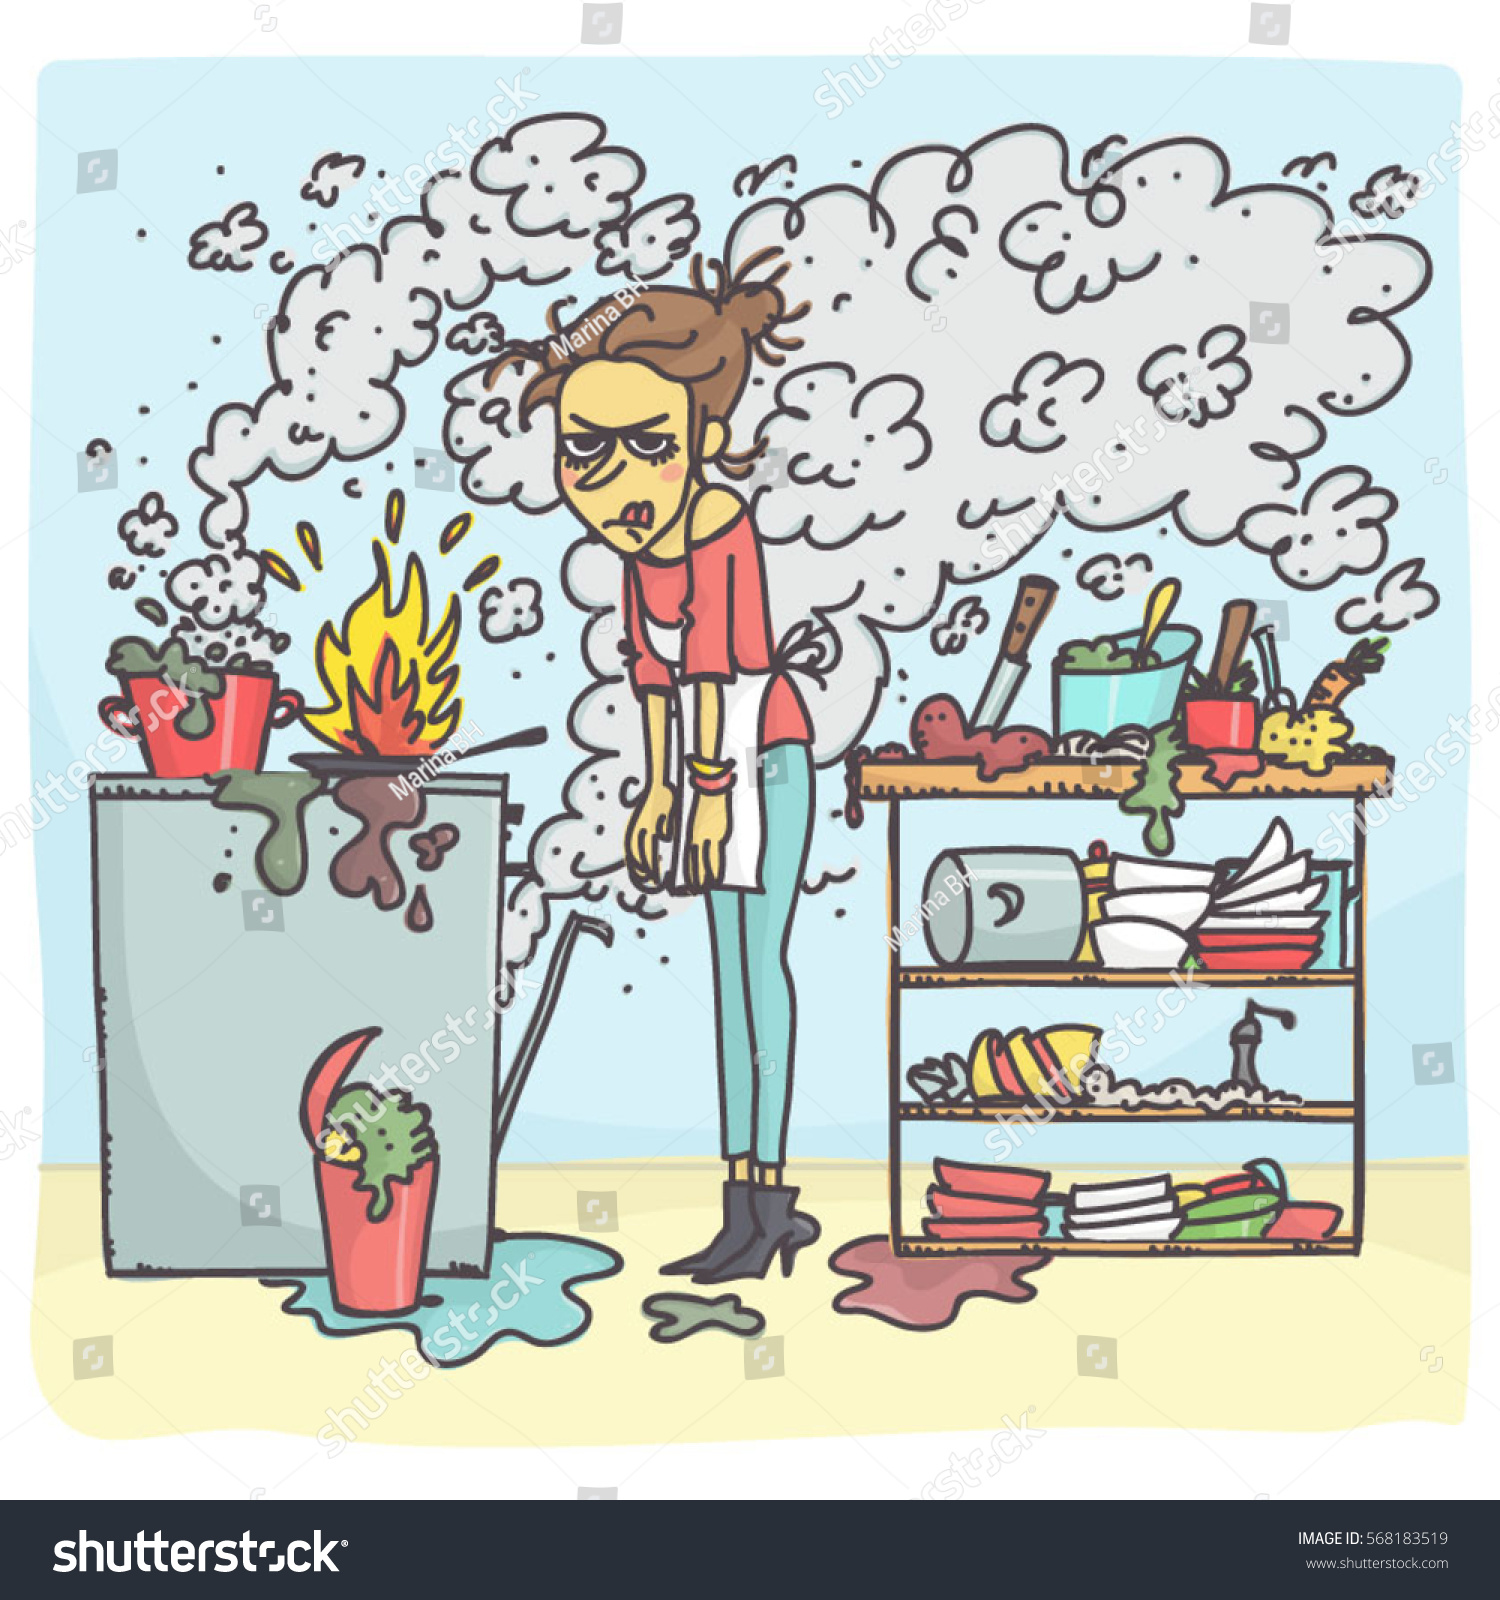 Cartoon Illustration Stressed Woman Cooking Messy Stock Vector (Royalty Fre...